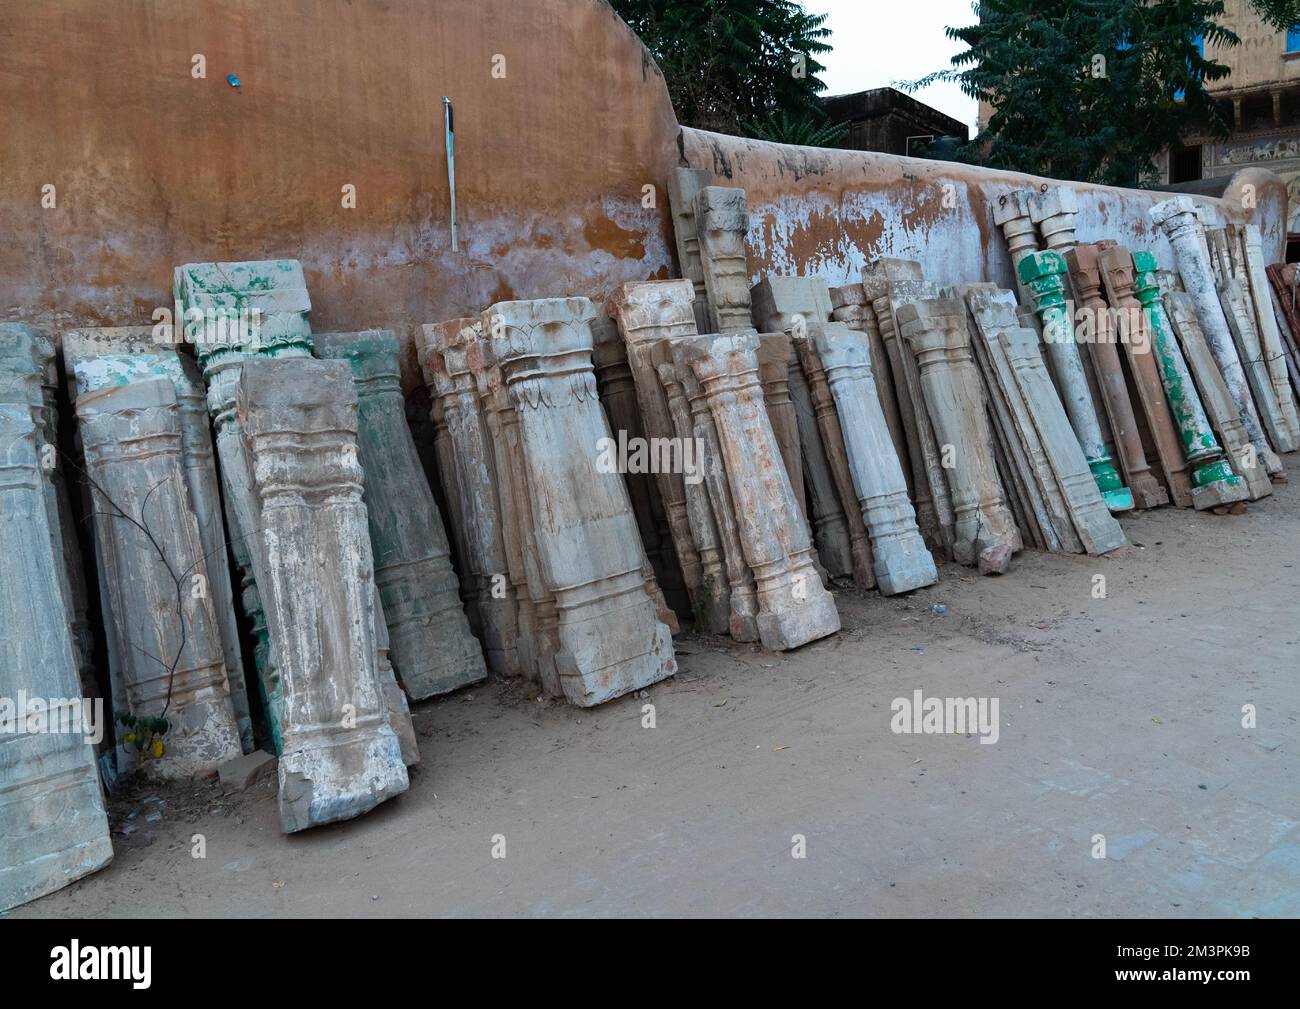 Antique stone pillars for sale in a shop, Rajasthan, Mandawa, India Stock Photo